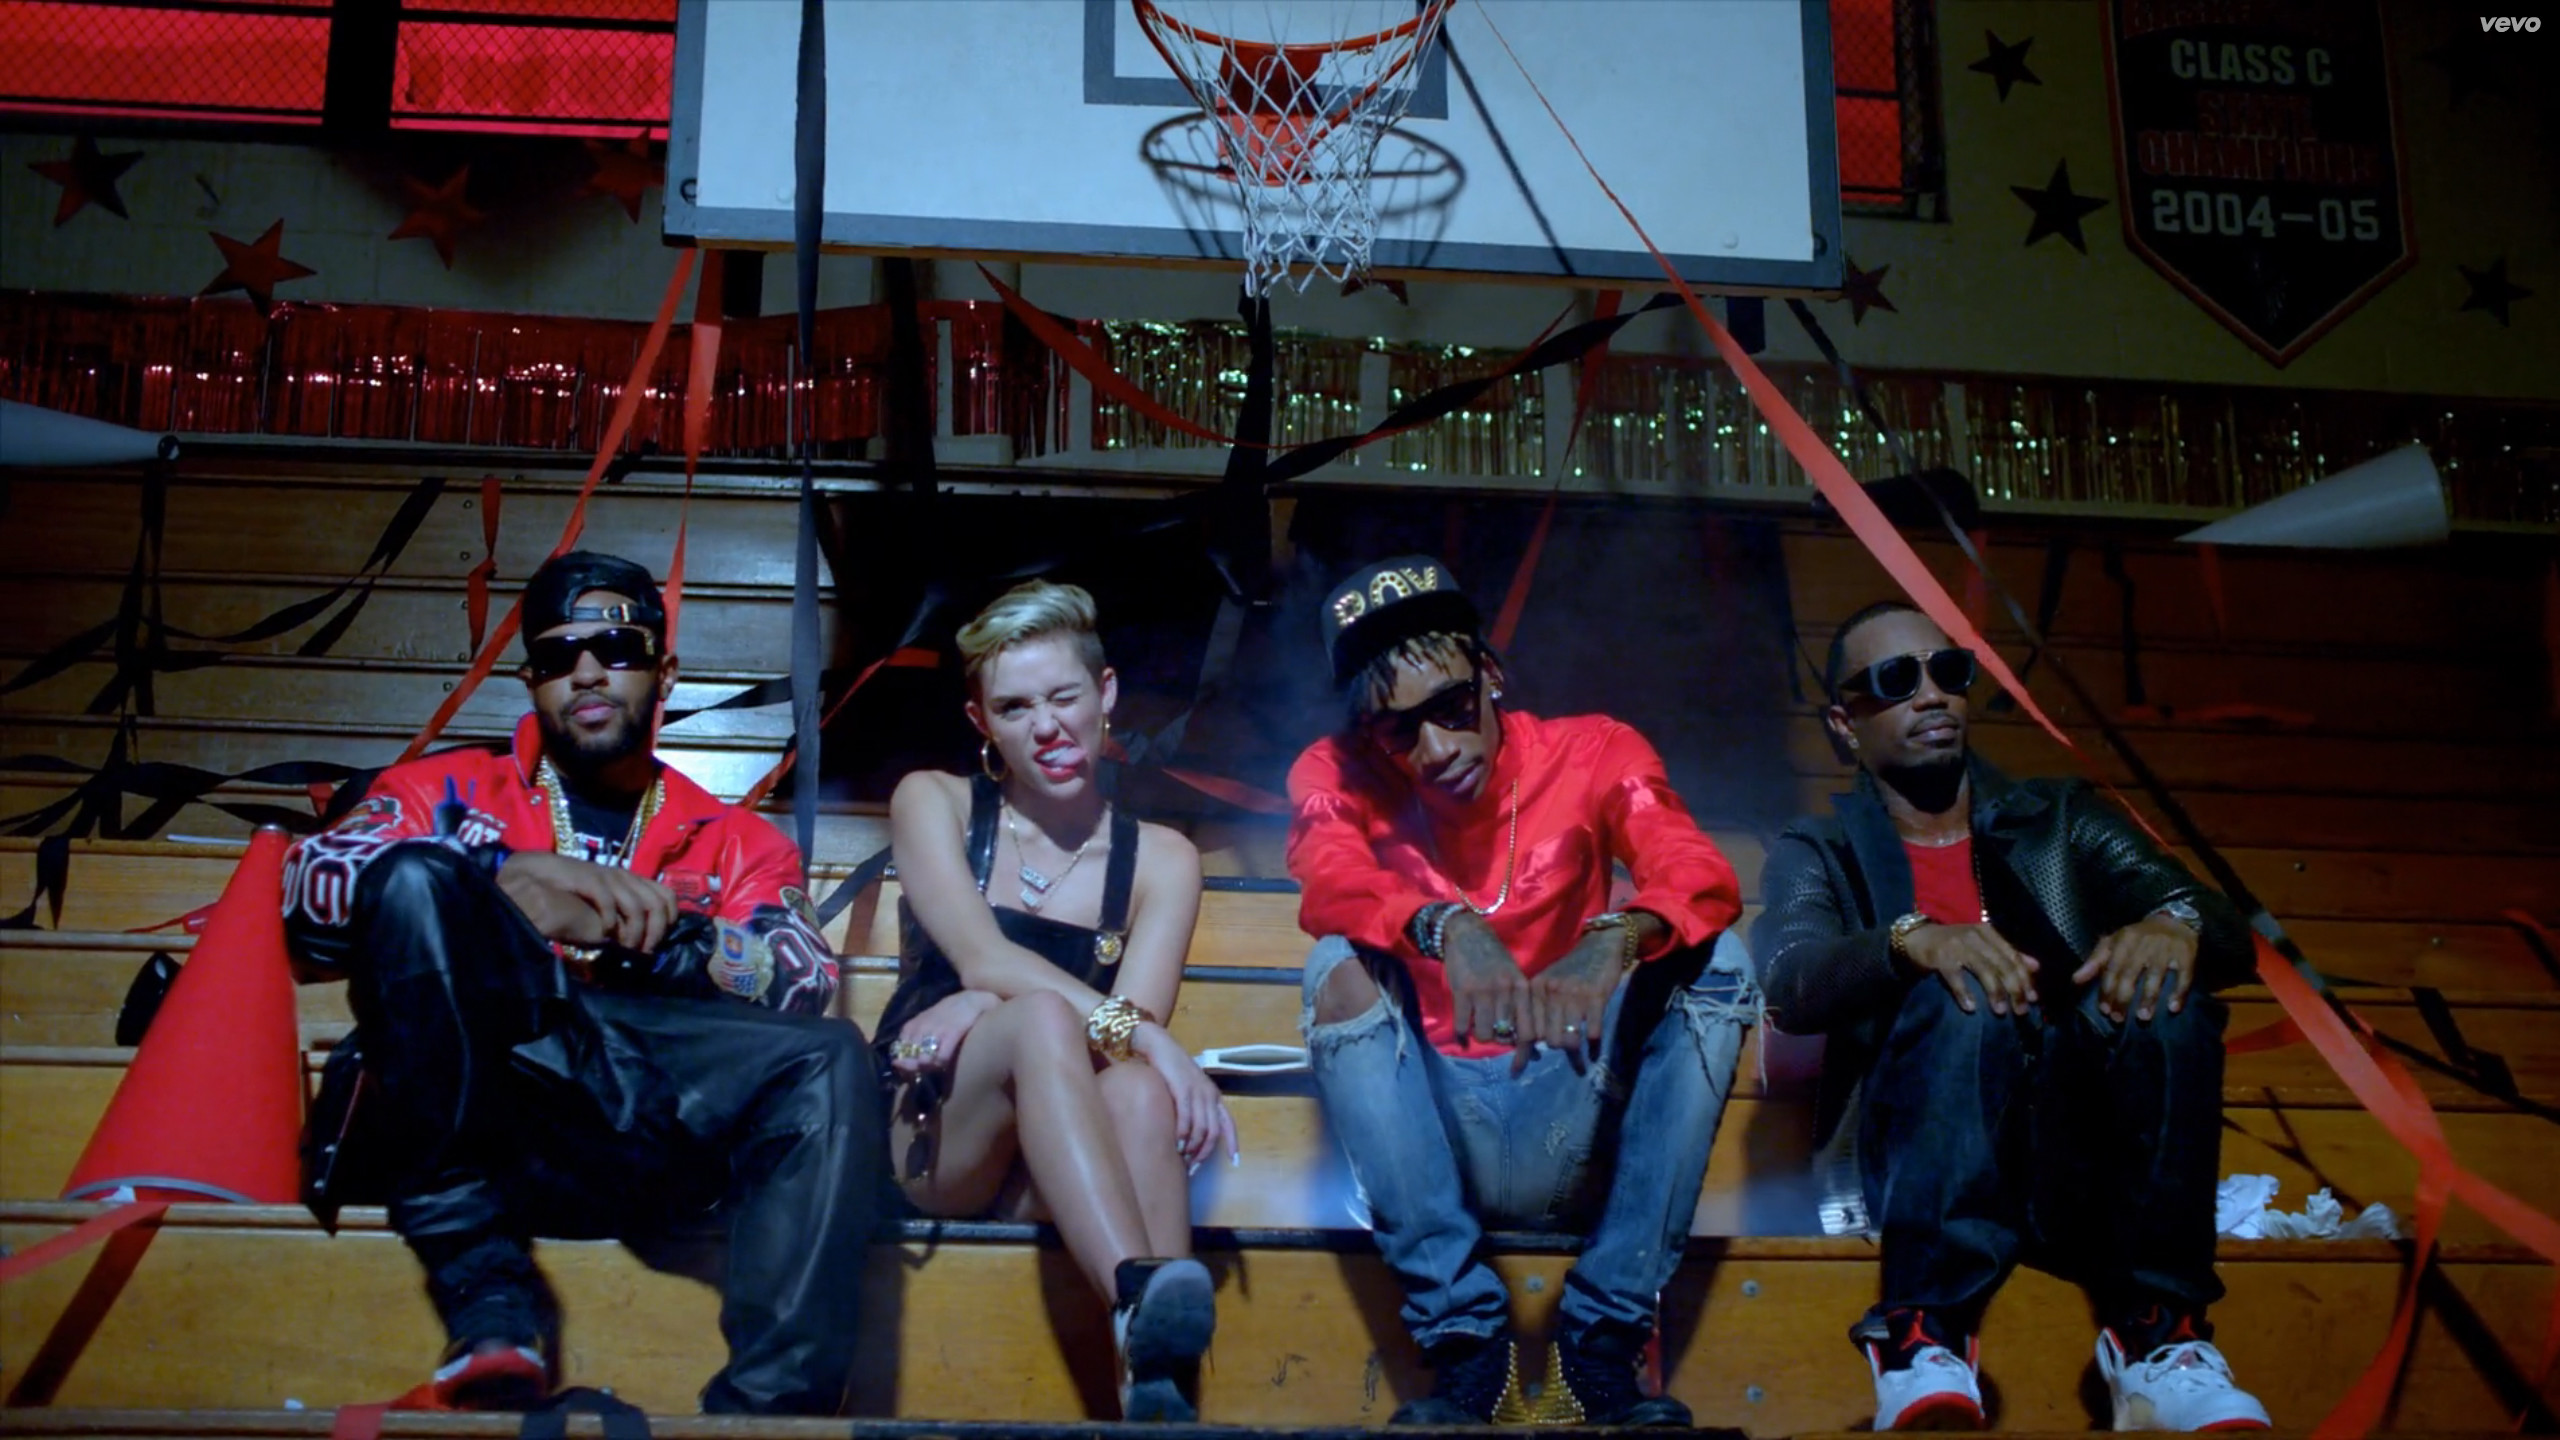 2560x1440 No elaboration needed. shiekh-shoes-23-mike-will-made-it-miley-